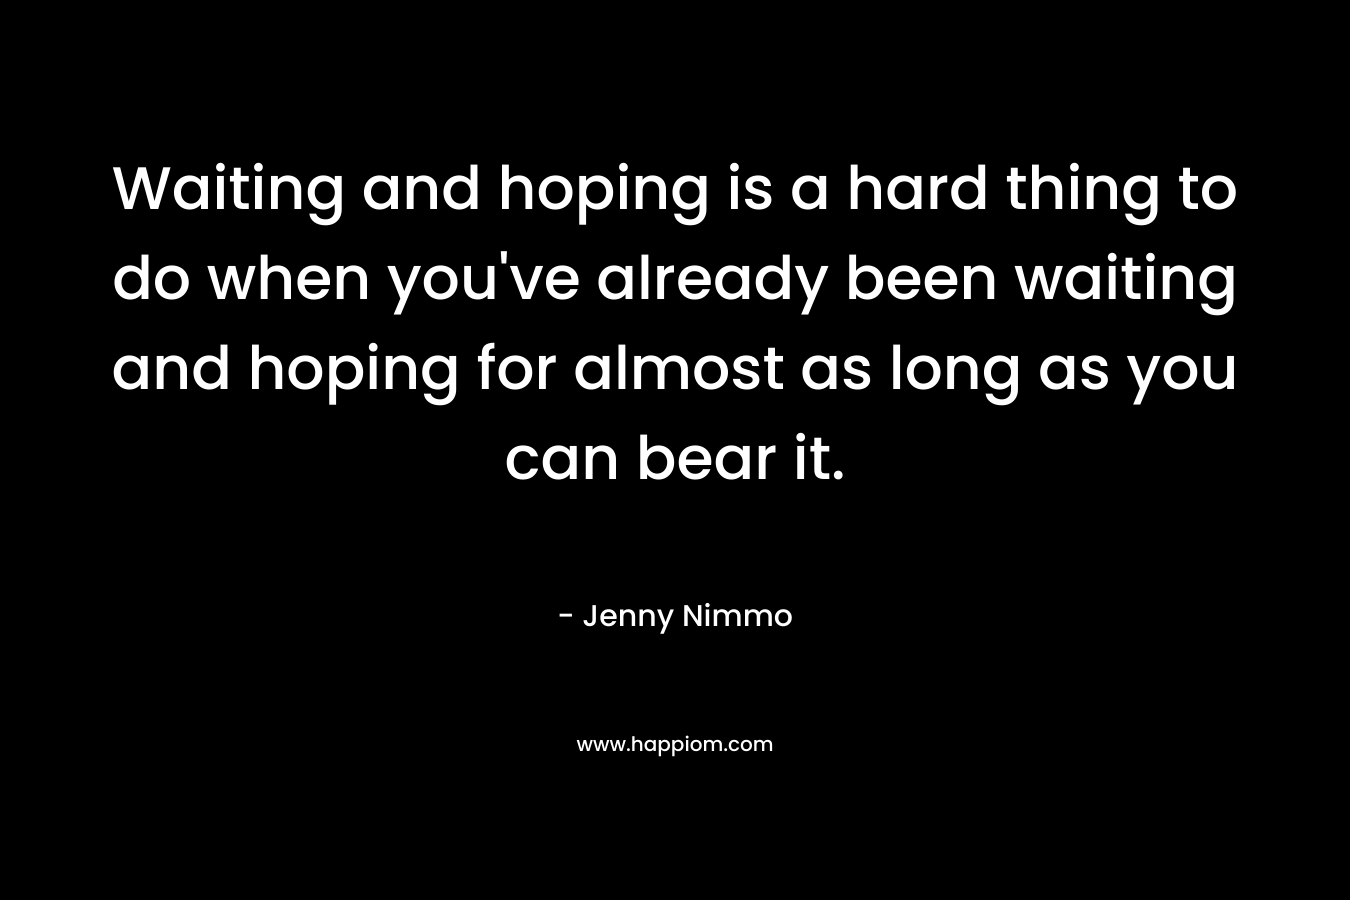 Waiting and hoping is a hard thing to do when you've already been waiting and hoping for almost as long as you can bear it.